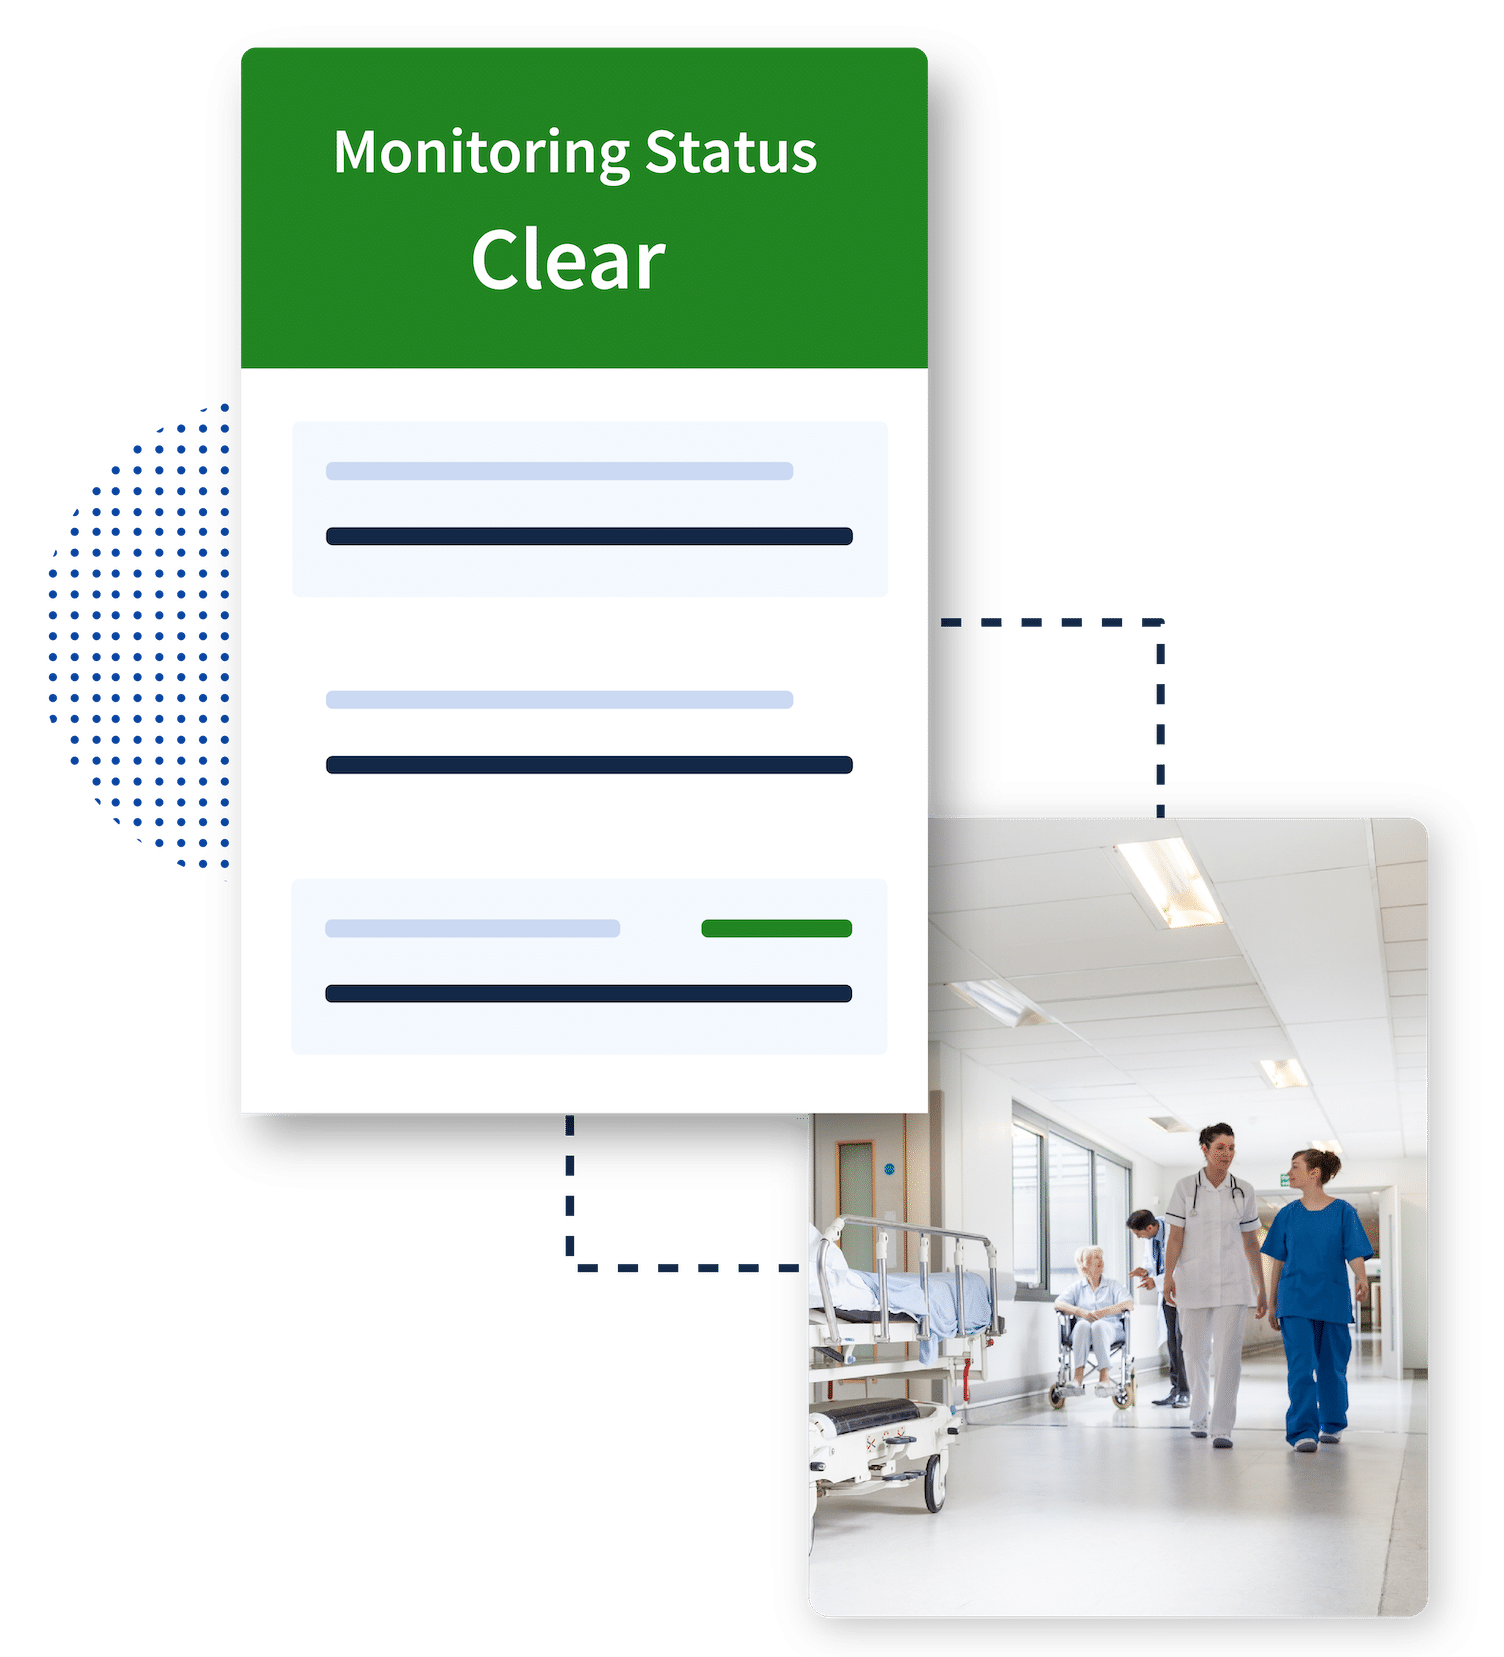 A group of providers with their monitoring status marked as clear.